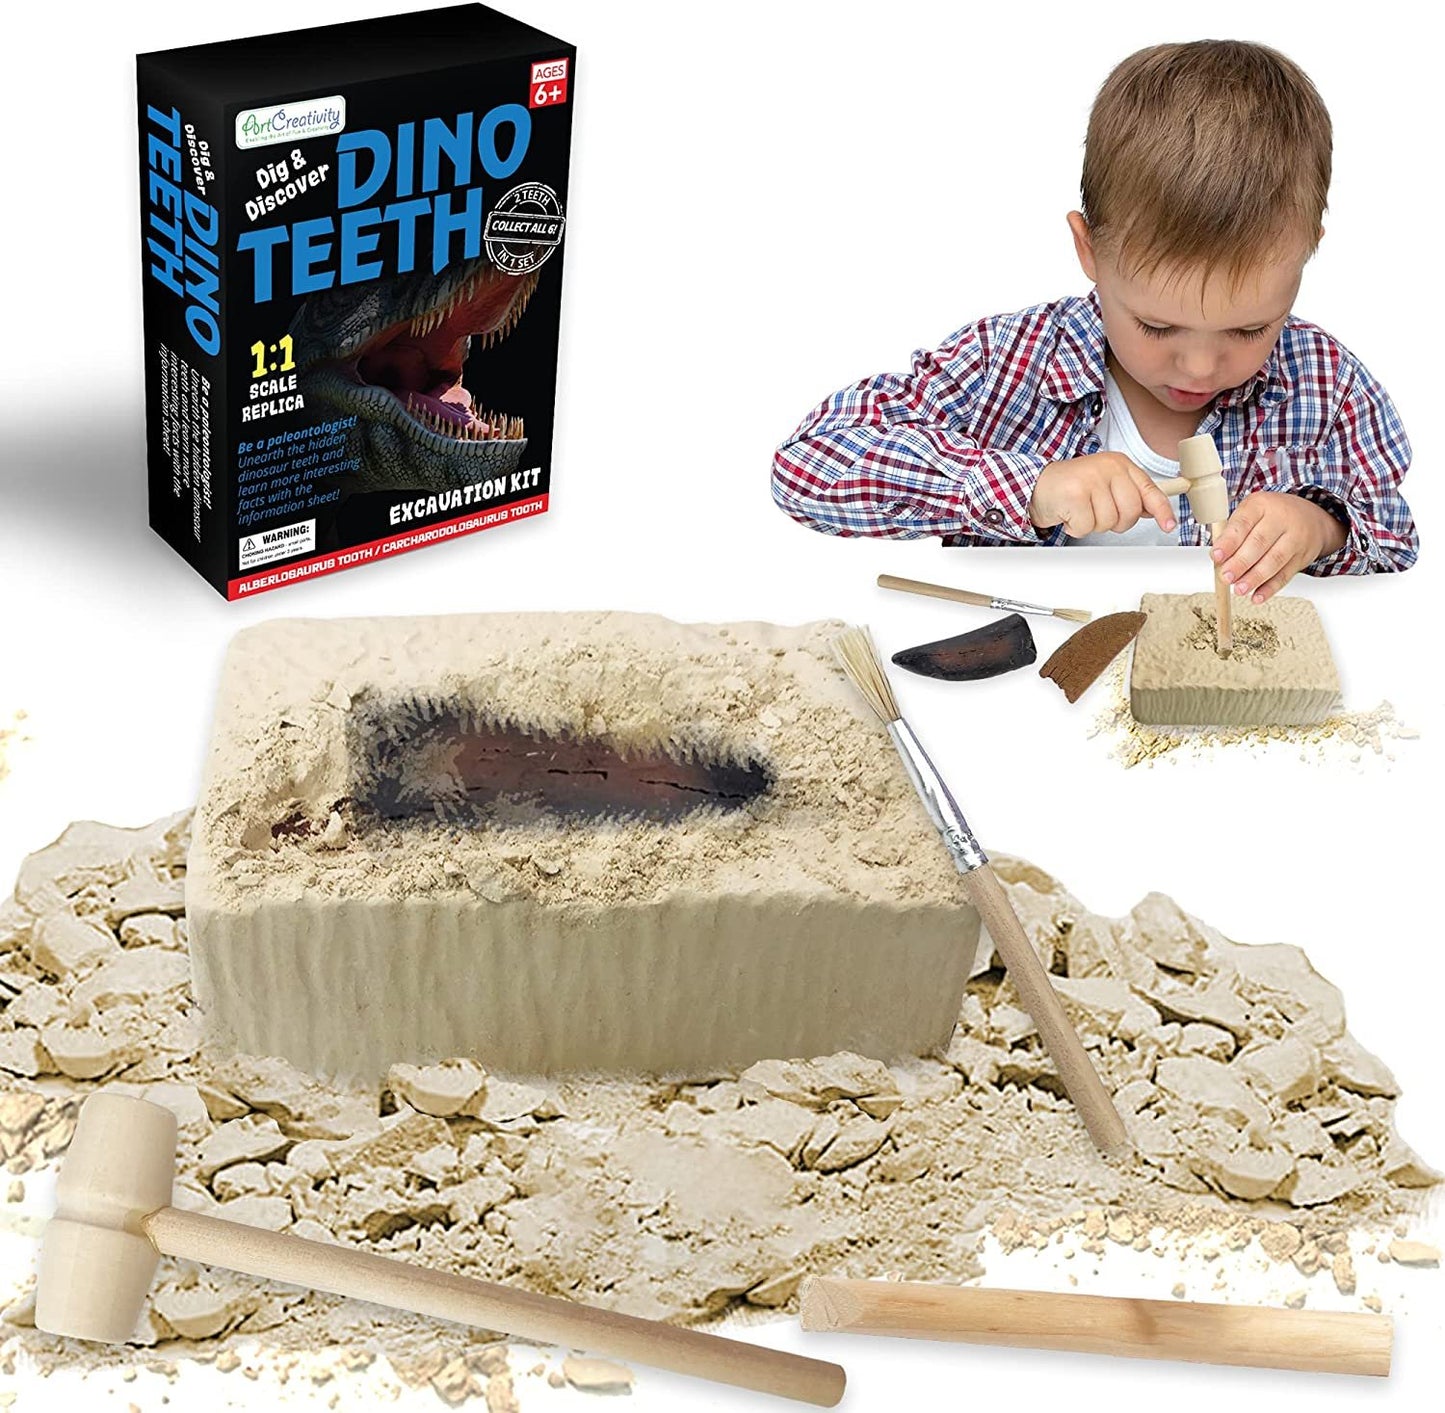 ArtCreativity Dino Teeth Dig and Discover Excavation Kit for Kids, Includes Alberlosaurus and Carcharodolosaurus Toy Fossil Teeth with 2 Digging Tools, Interactive Dinosaur Gifts for Boys and Girls